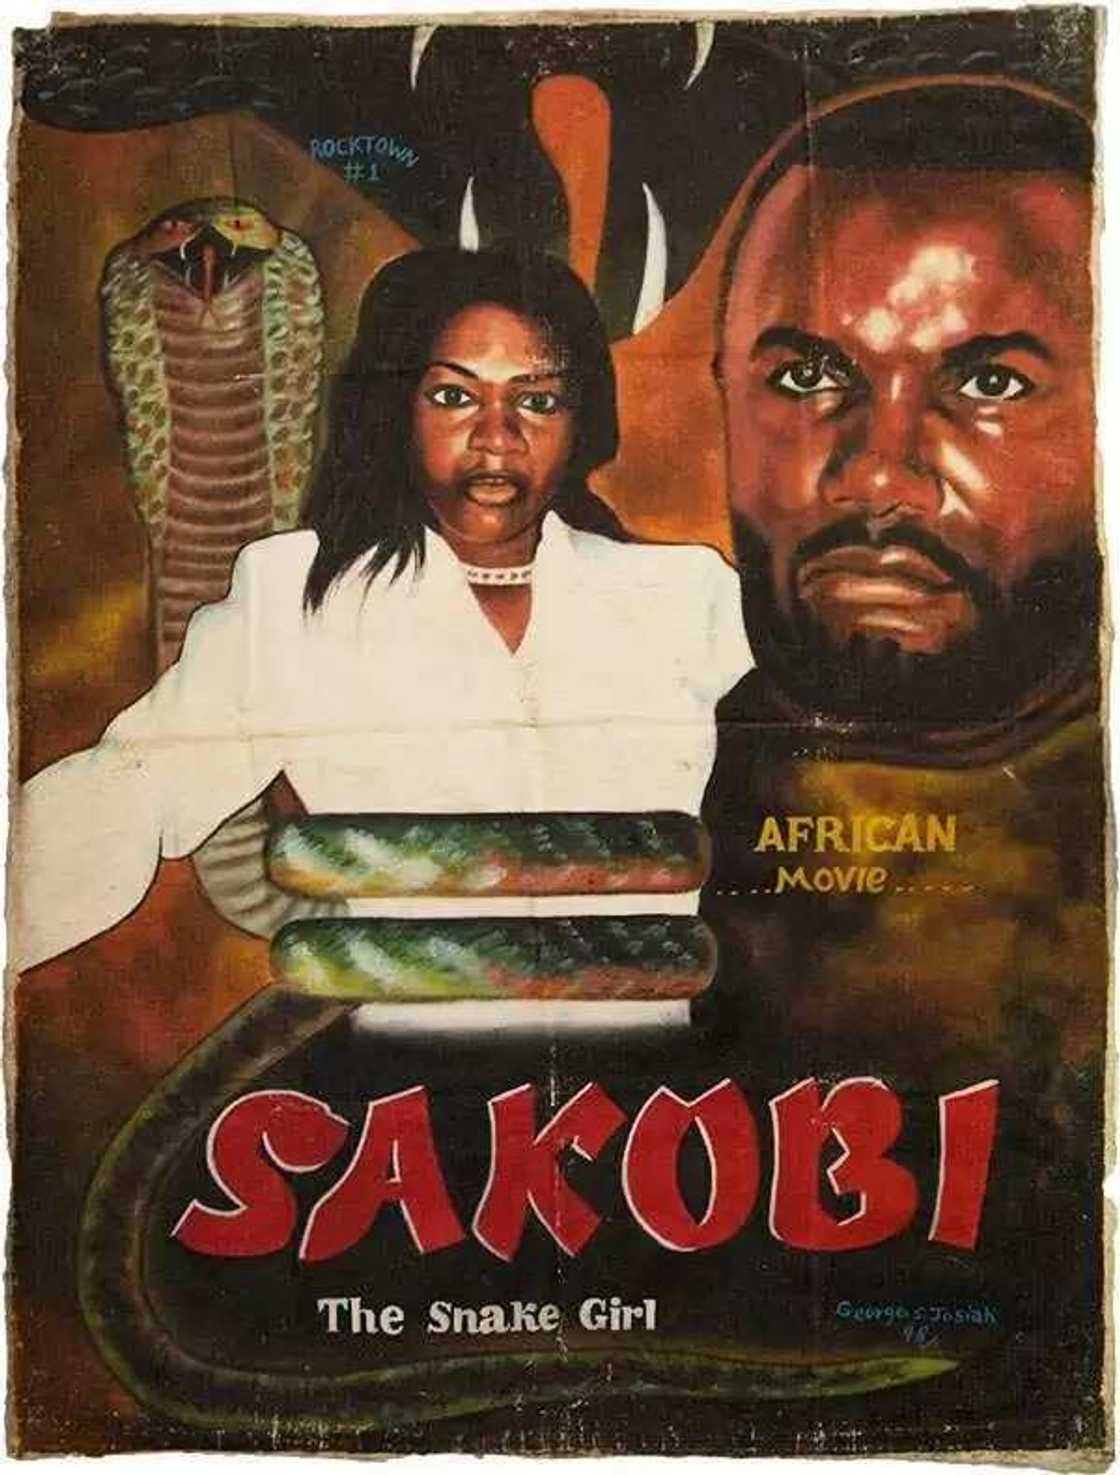 Best Nollywood movies of all time